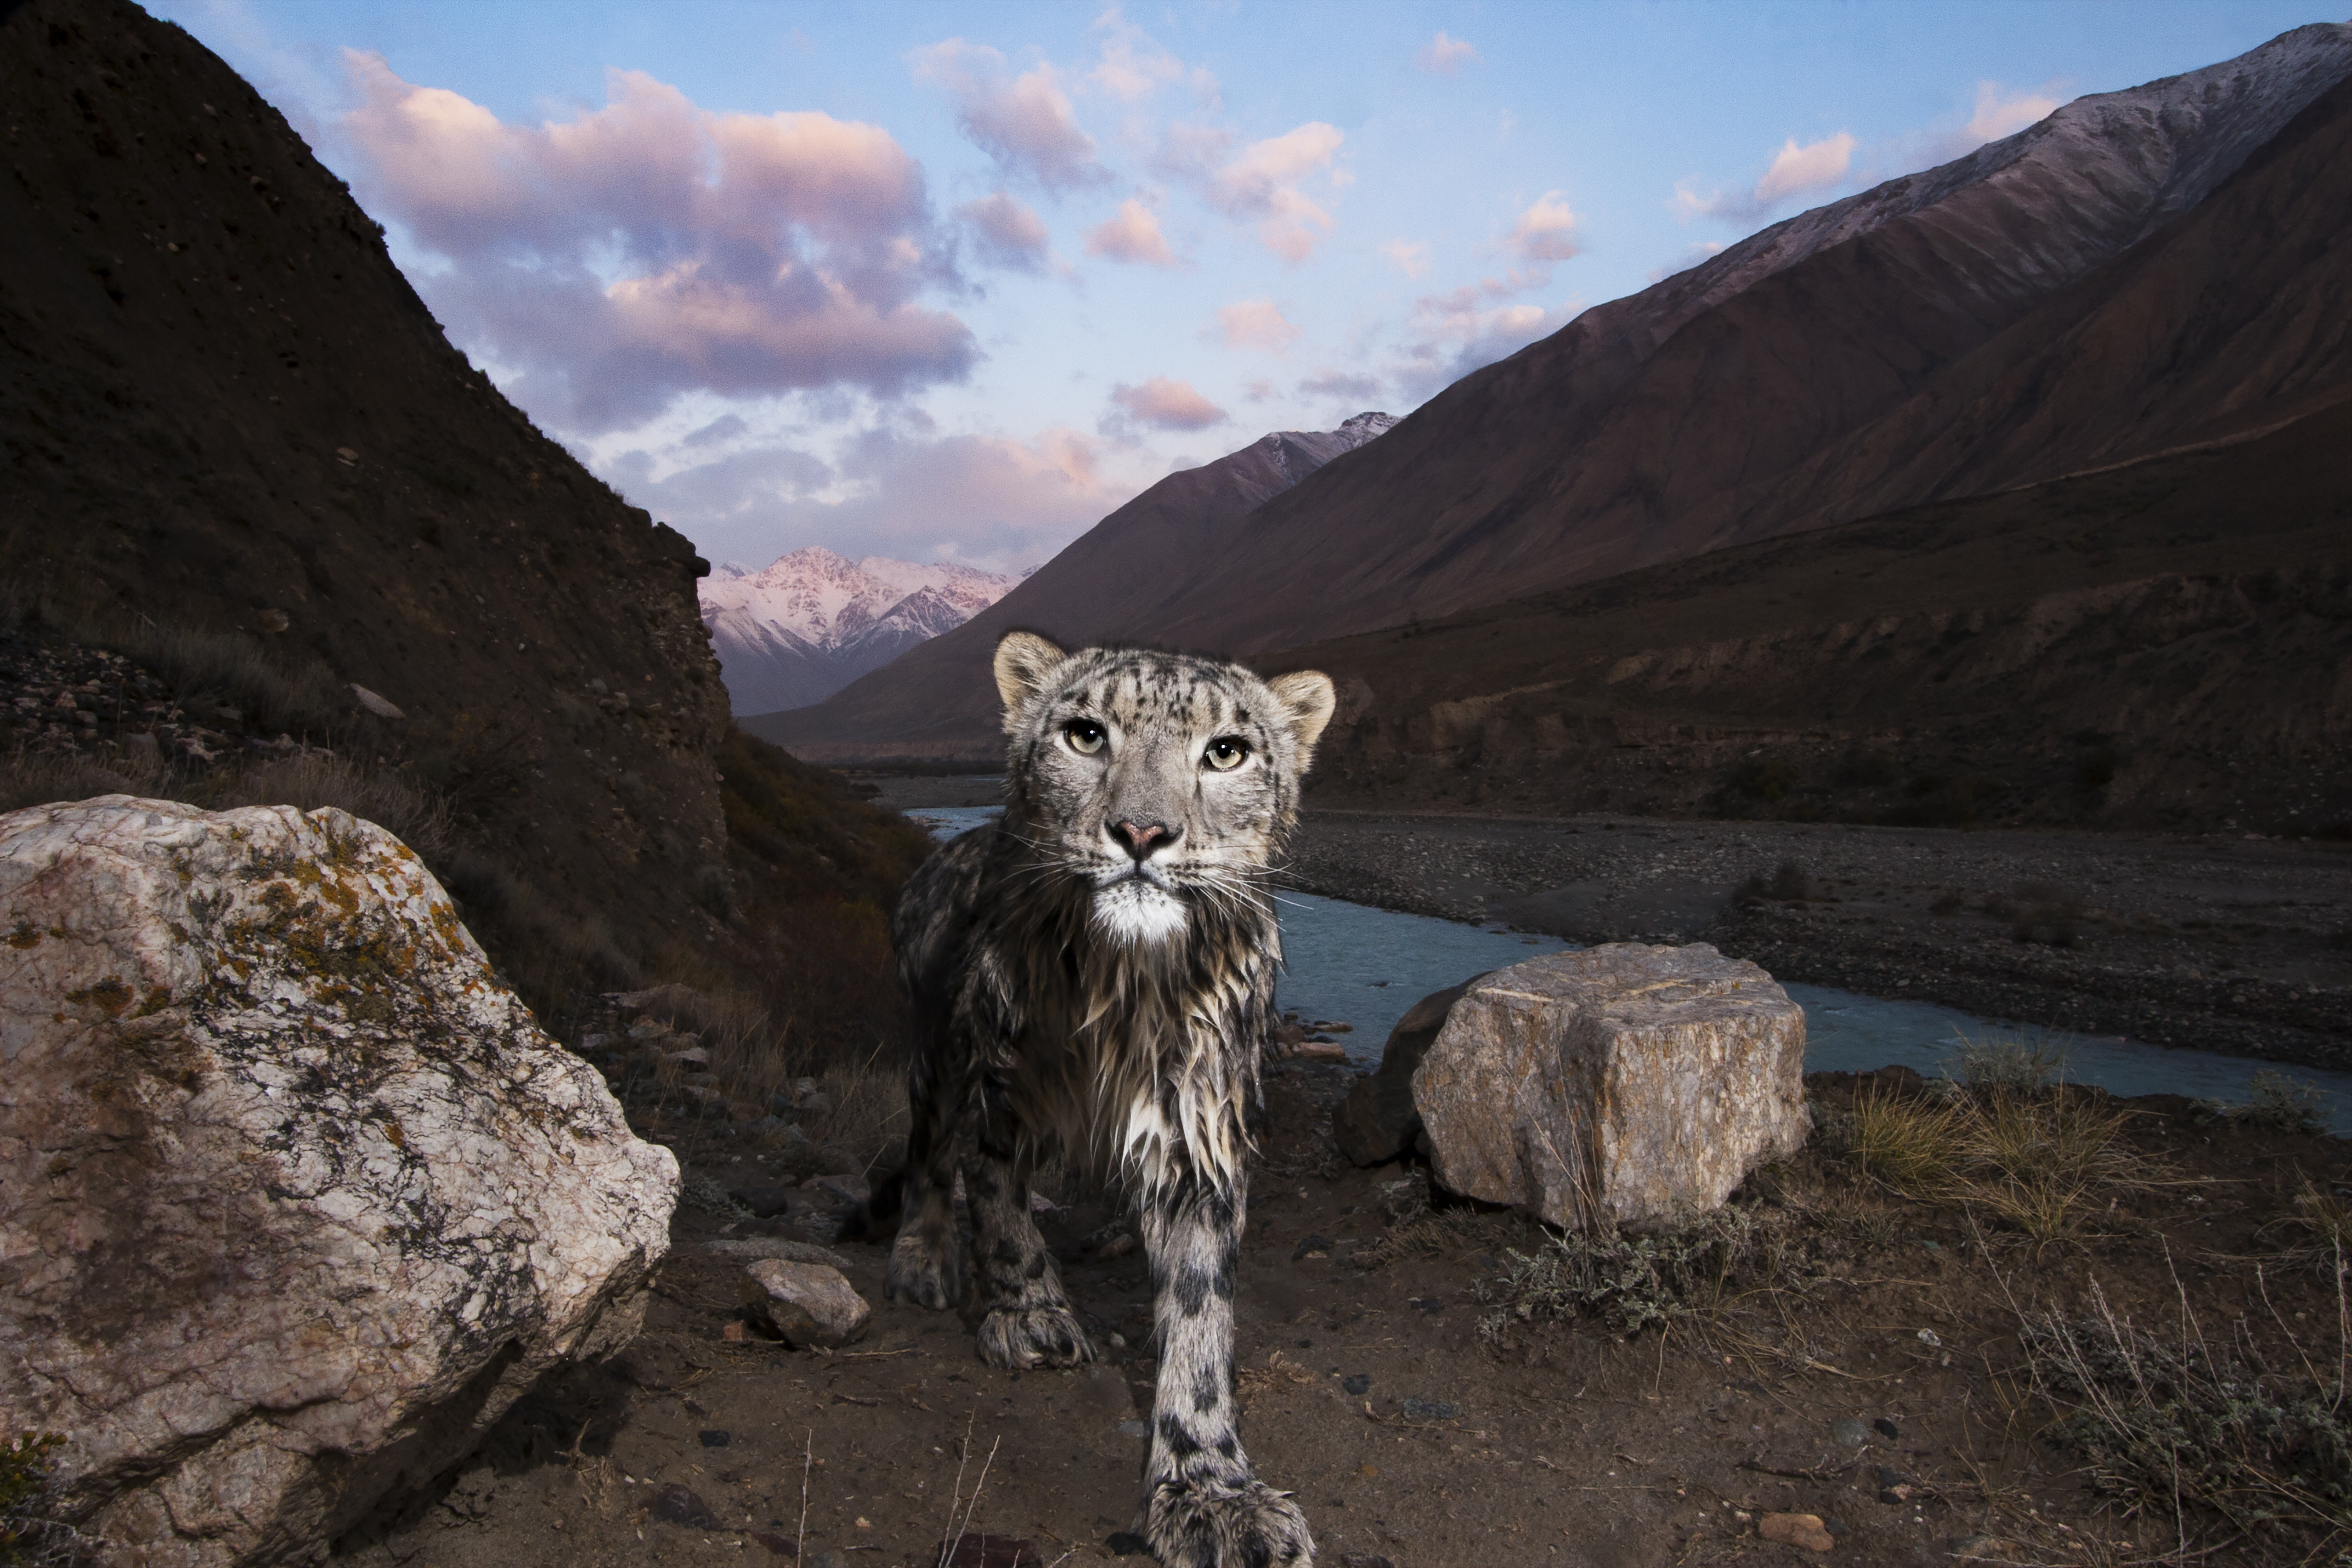 "Snow Leopard female, wet after having crossed river, in mountain valley, Uchkul River, Sarychat-Ertash Strict Nature Reserve, Tien Shan Mountains, eastern Kyrgyzstan"